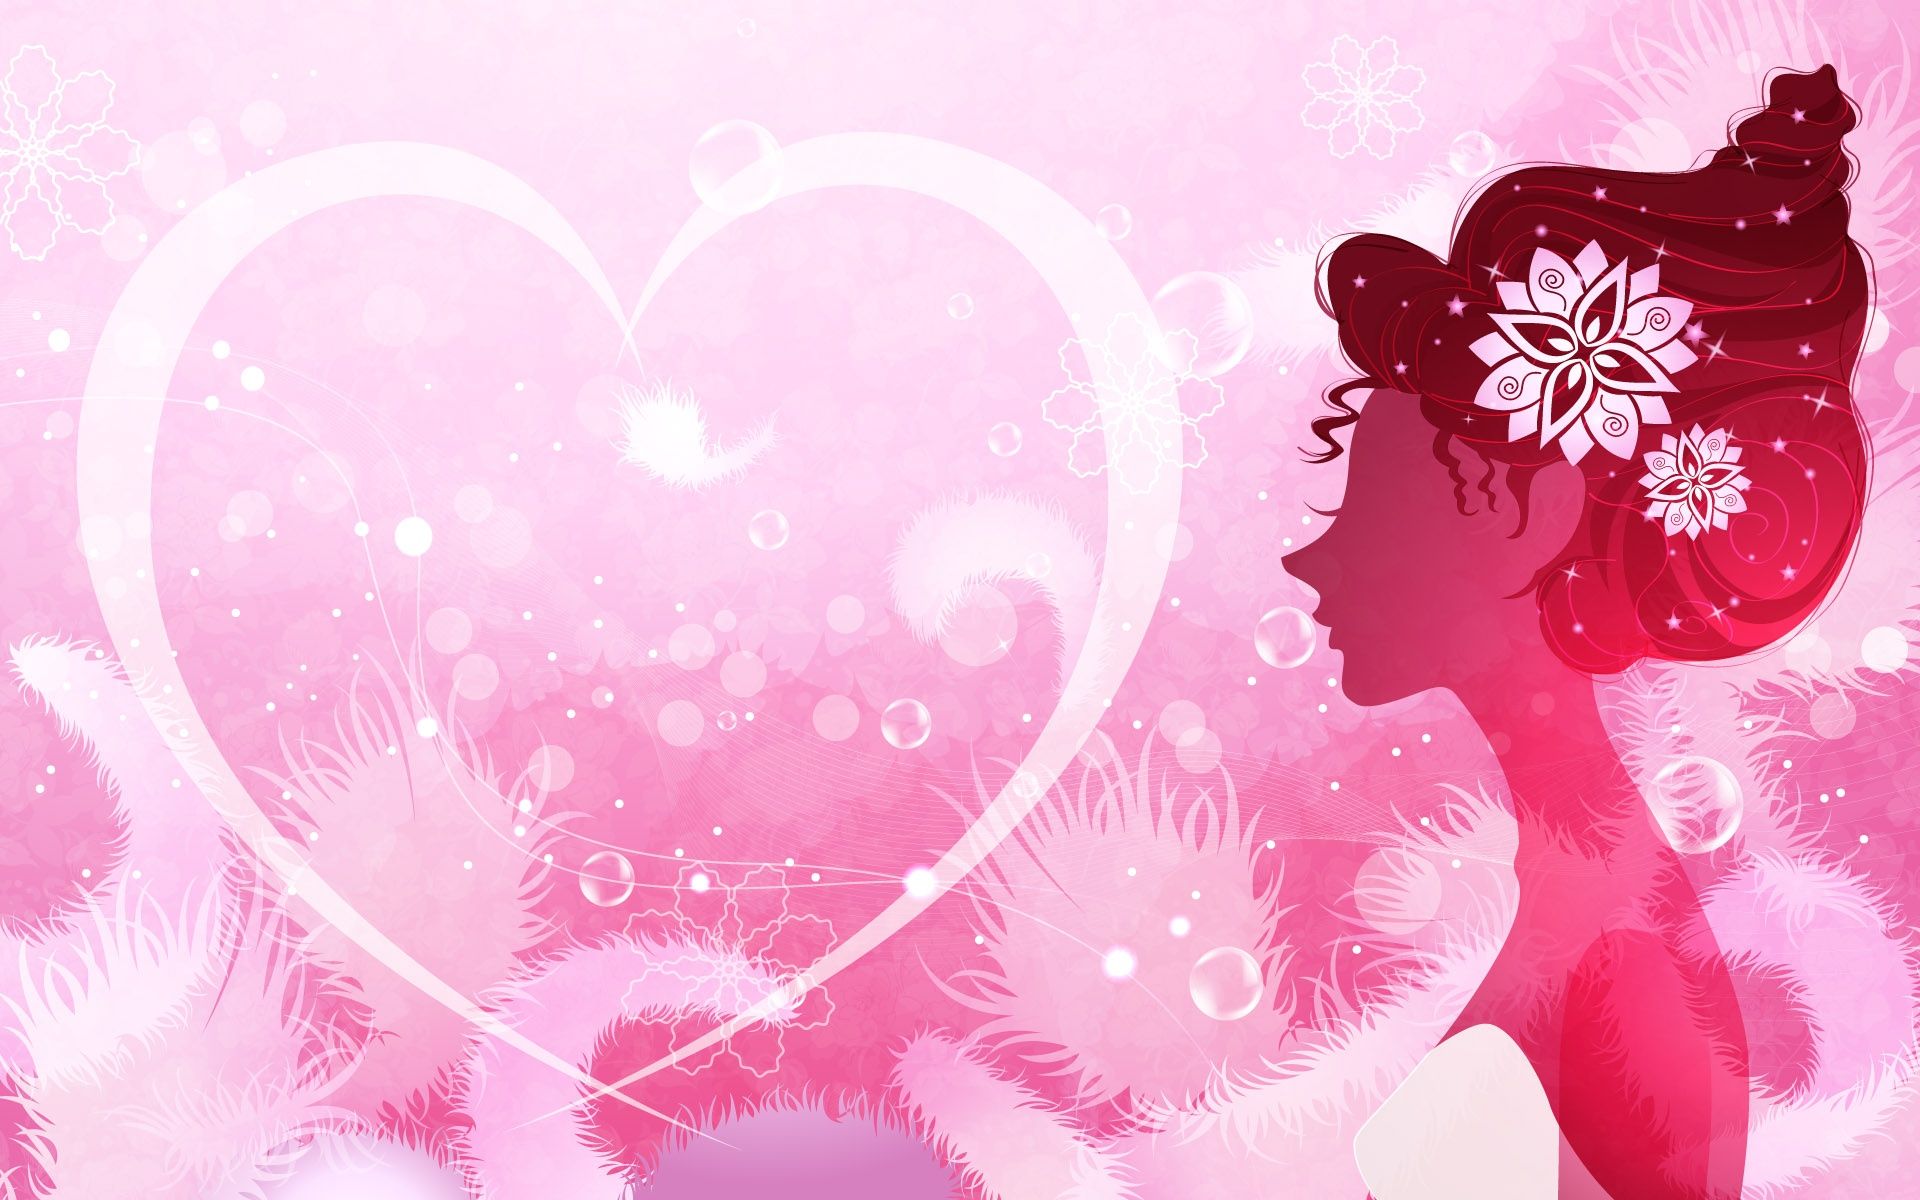 Wallpaper Vector Women And Love Heart Shaped 1920x1200 HD Picture, Image